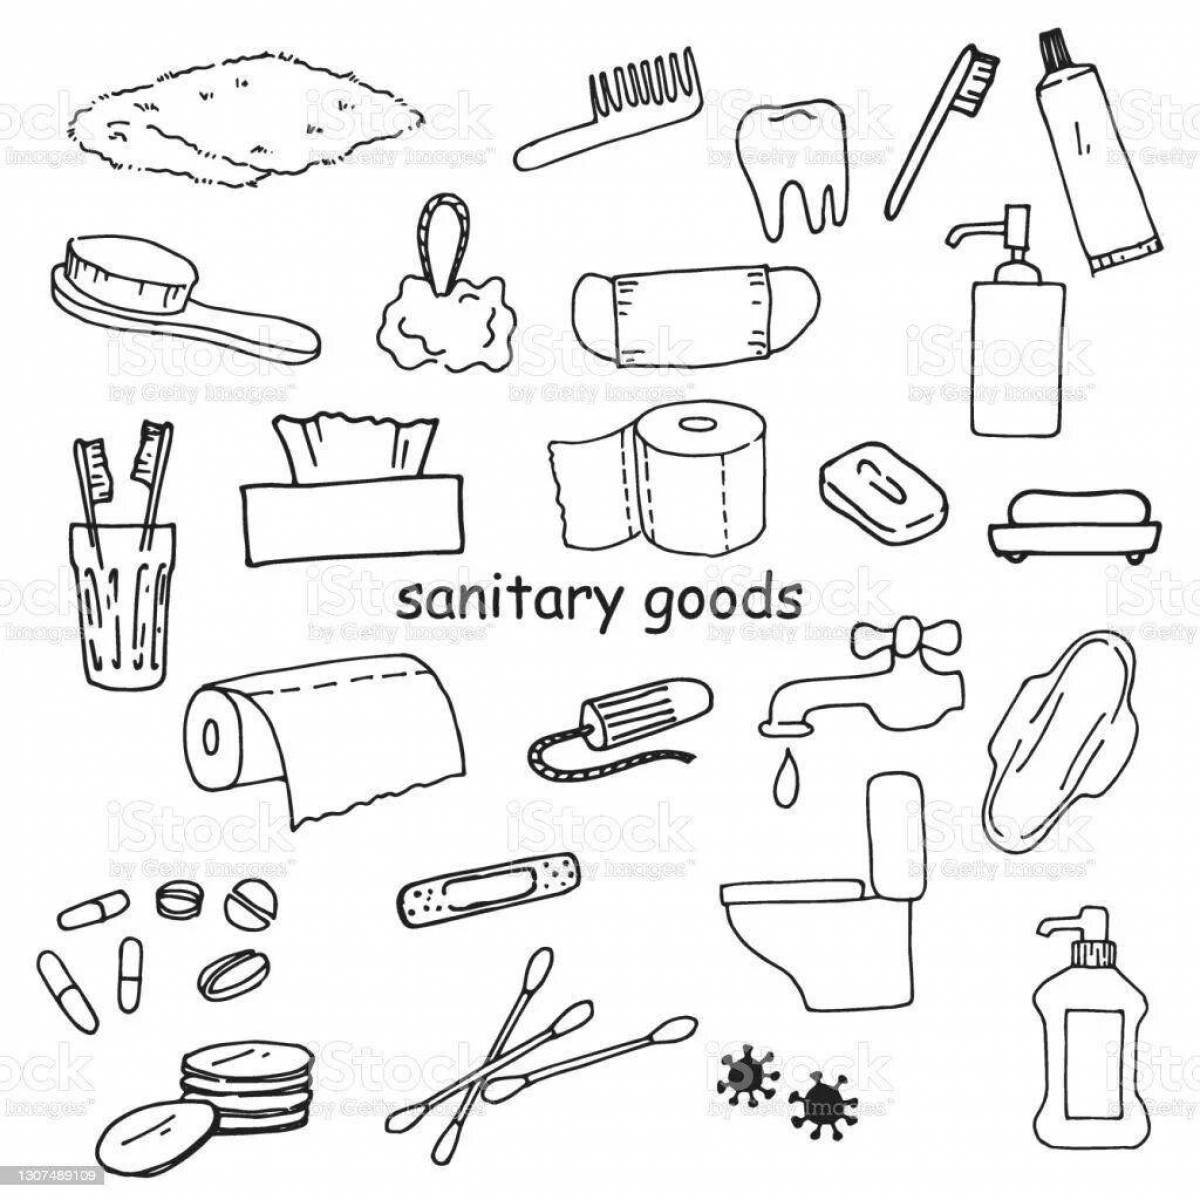 Involvement of personal hygiene items for preschoolers